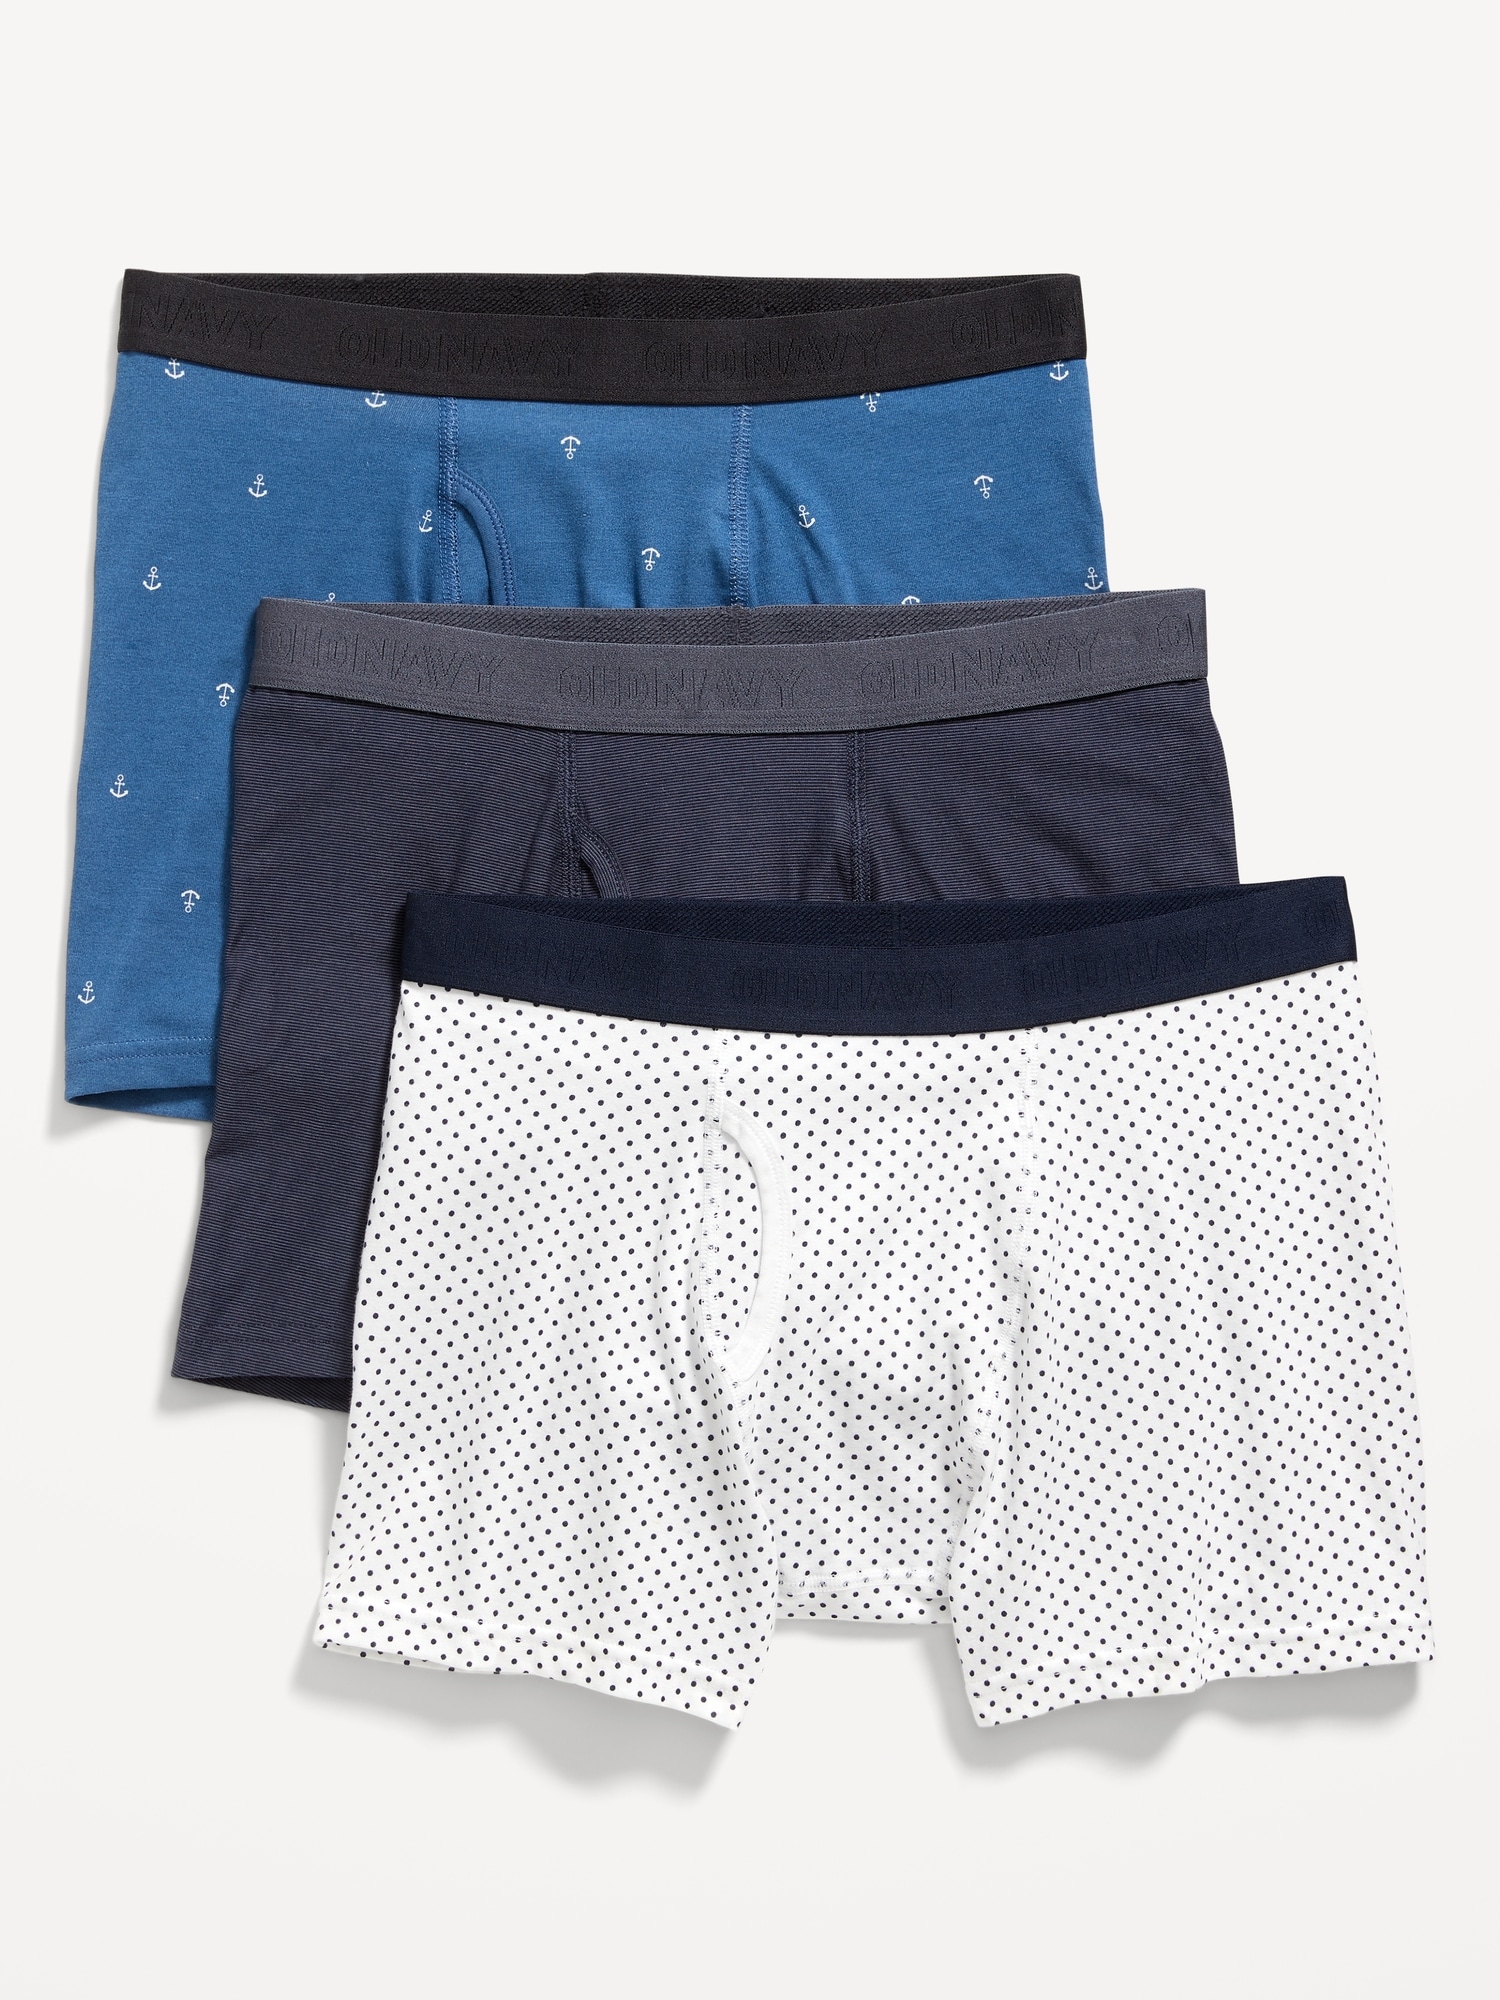 3-Pack Old Navy Men's Go-Dry Cool Performance Boxer-Briefs Underwear (Fog  Gray or Black Jack or Basic Multi Pack, Limited Sizes, 5 inseam) $5.98 ($2  each) + Free Store Pickup - Slickdeals